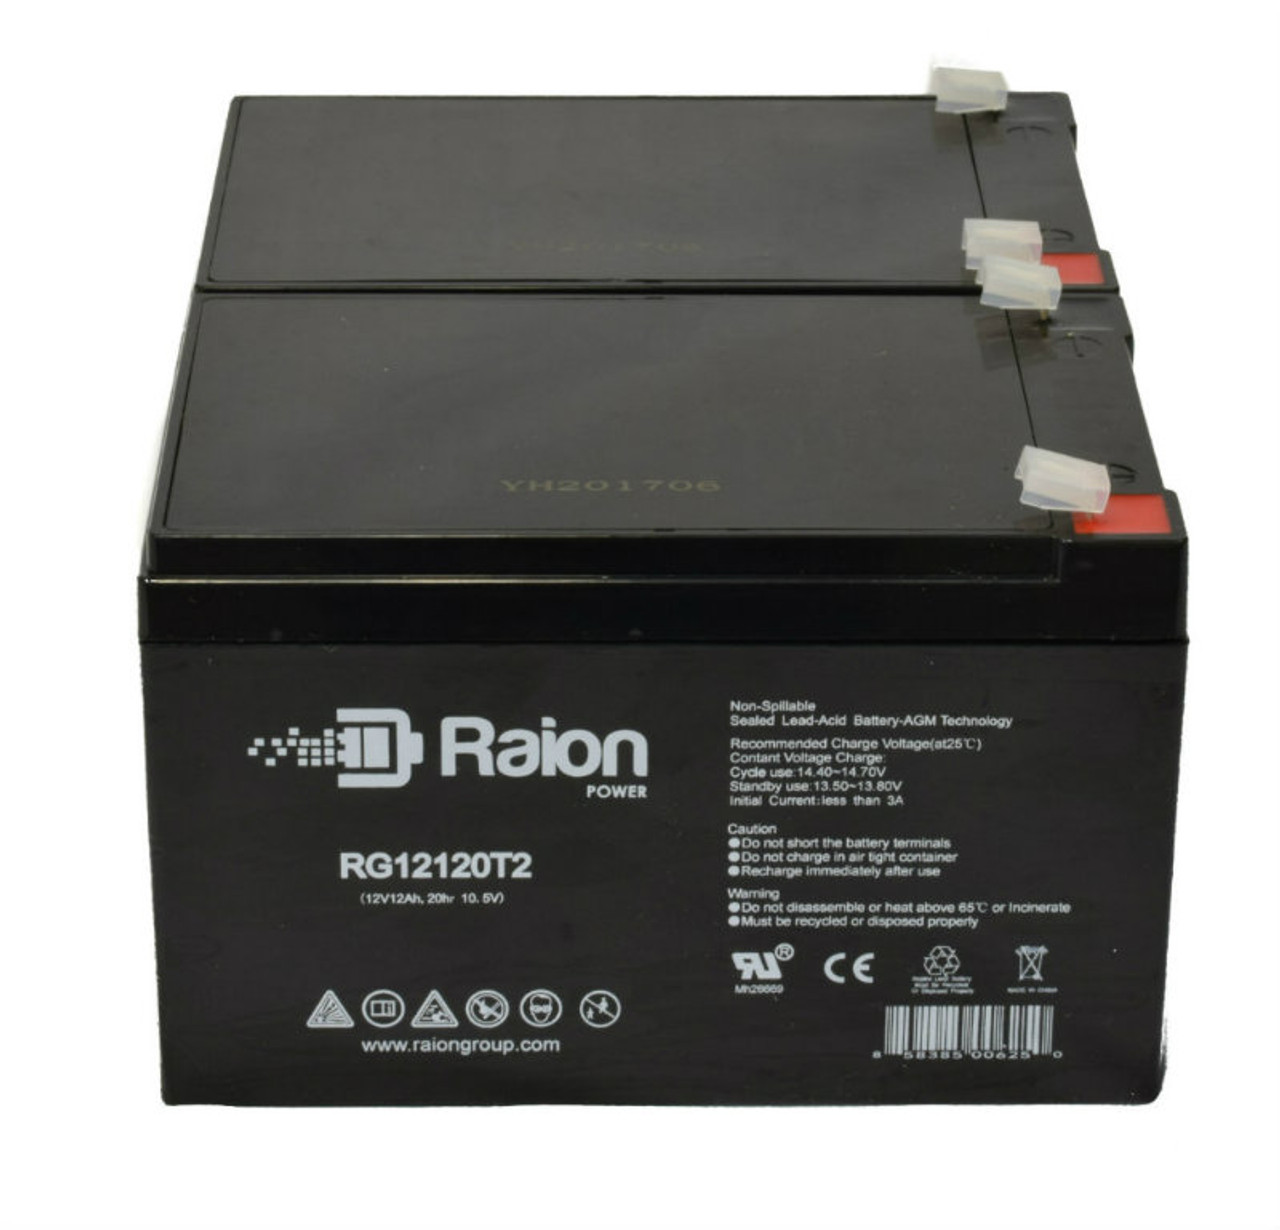 Raion Power 12V 12Ah Non-Spillable Compatible Replacement Battery for MATRIX NP10-12 - (2 Pack)